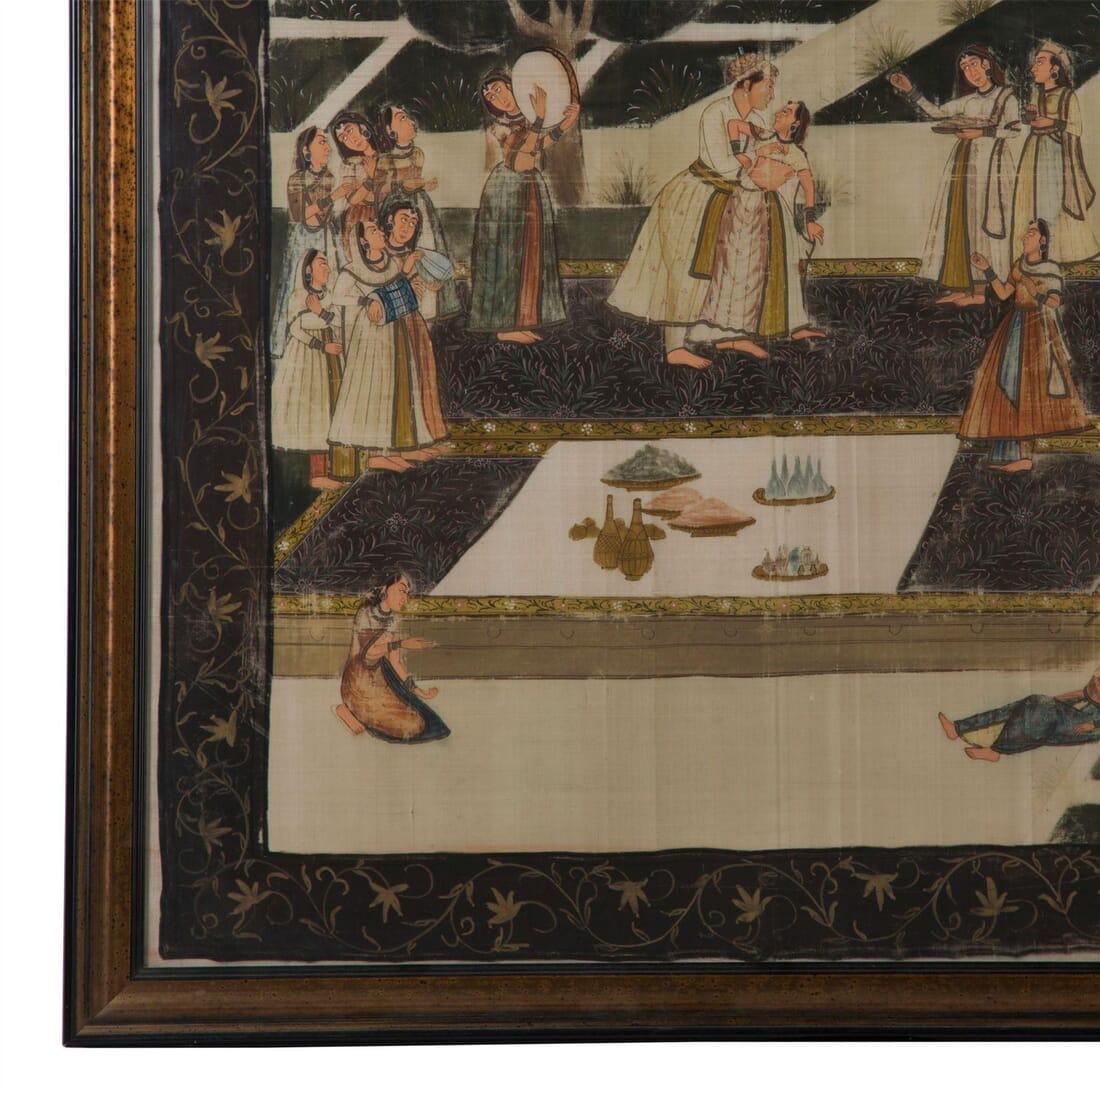 A late 19th century framed painting on silk of an Indian wedding scene.